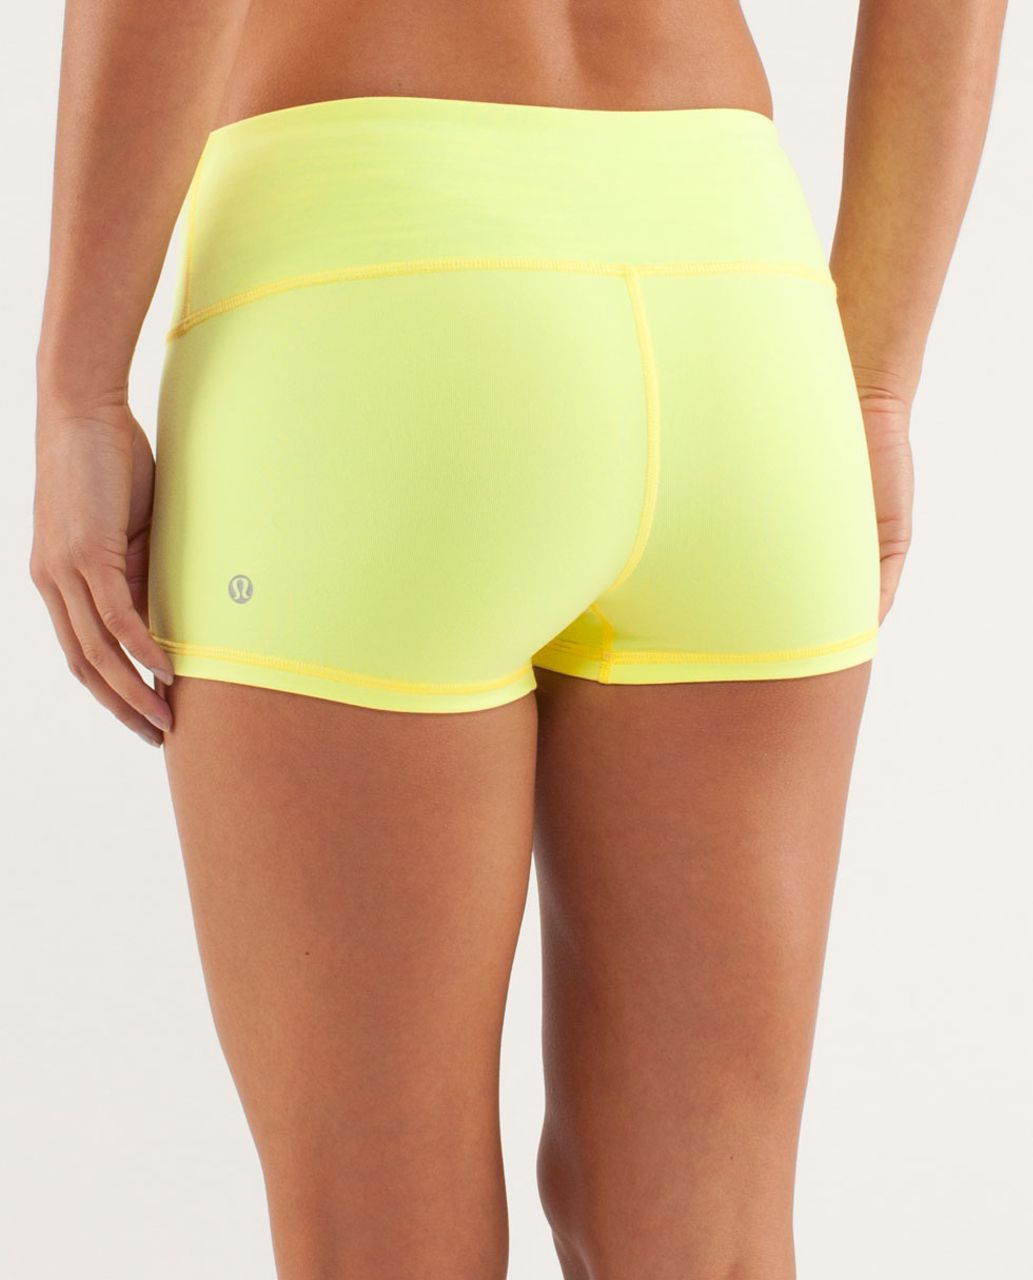 Lululemon Boogie Short - Clarity Yellow / Wee Are From Space Polar Cream Clarity Yellow